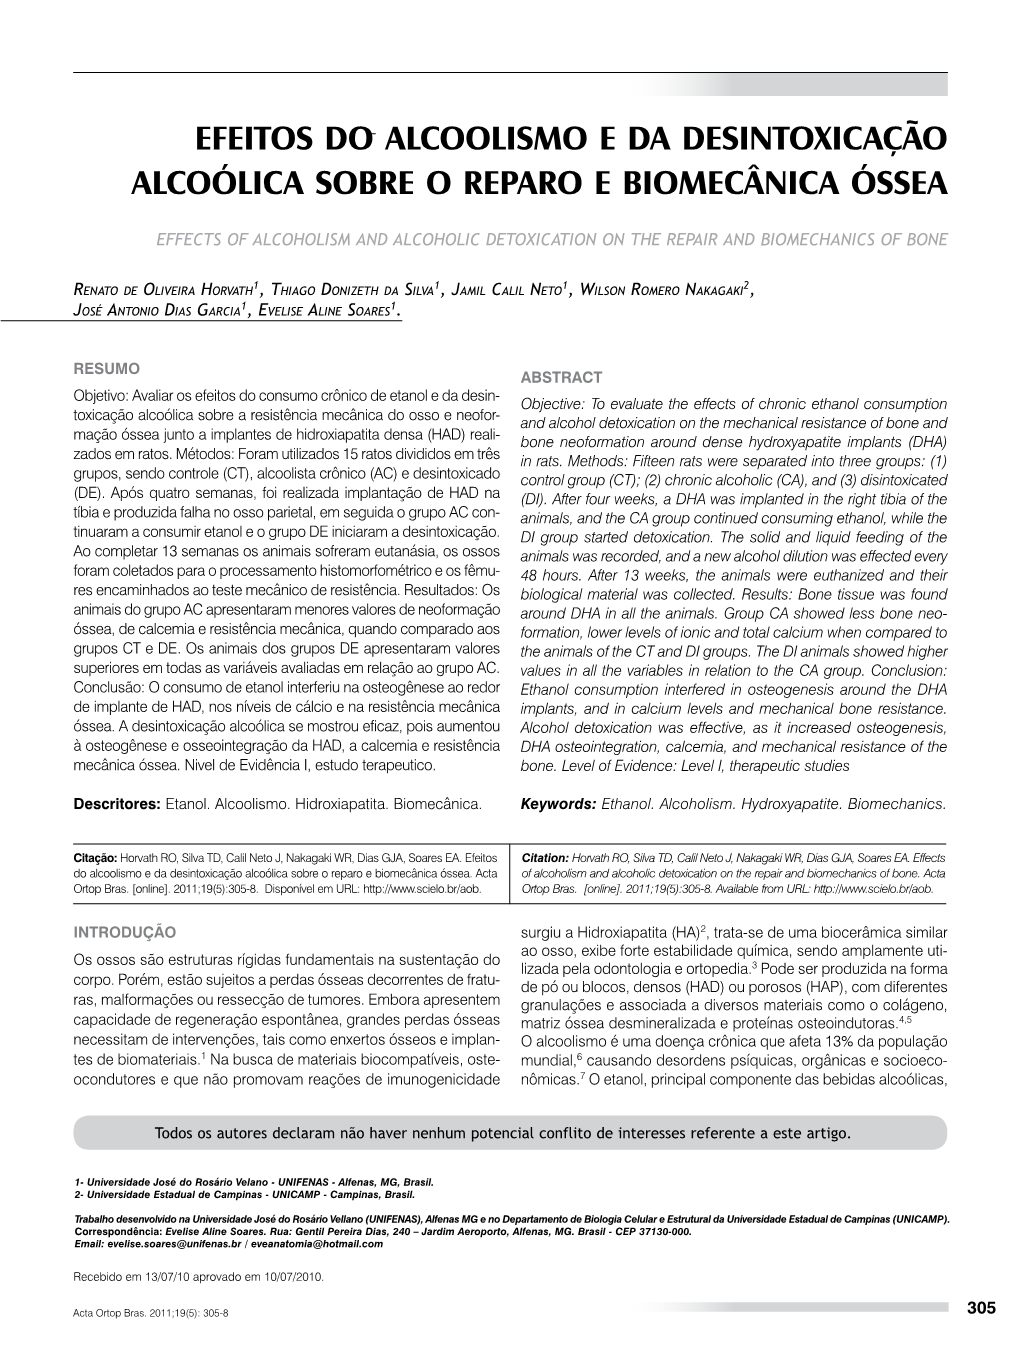 Effects of Alcoholism and Alcoholic Detoxication on the Repair and Biomechanics of Bone